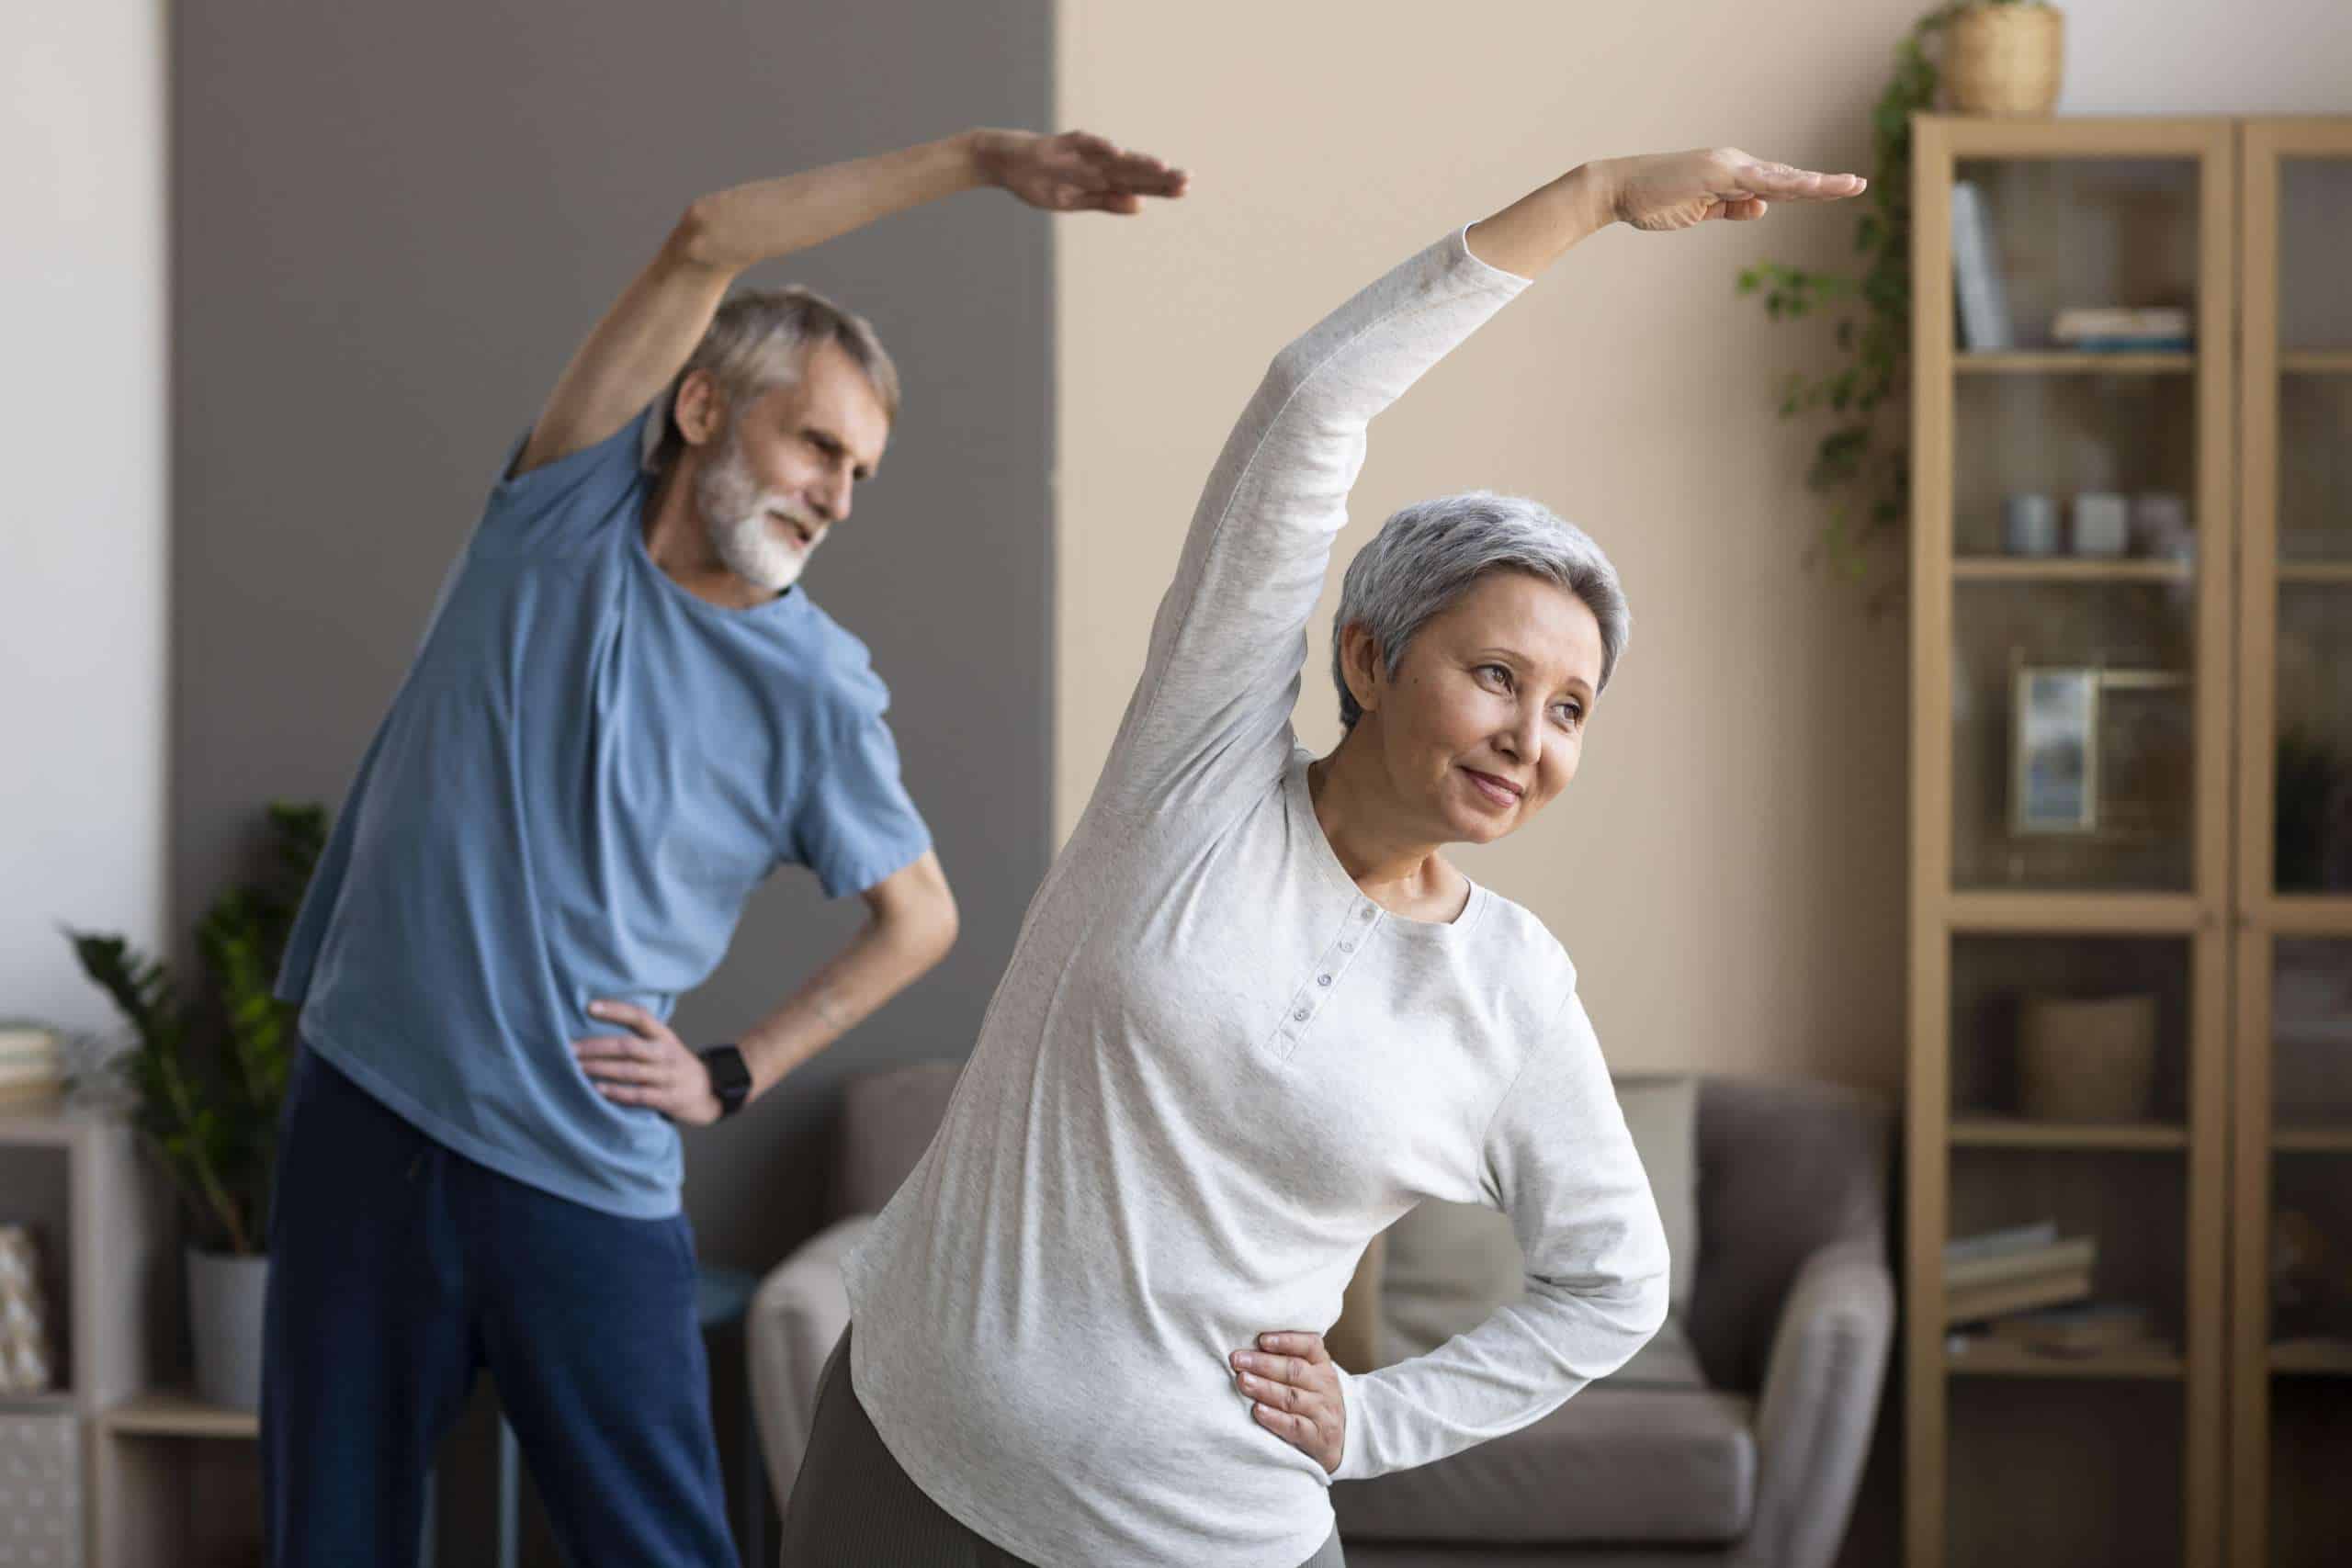 Aerobic exercise for seniors – how to improve muscle, heart and brain function simultaneously